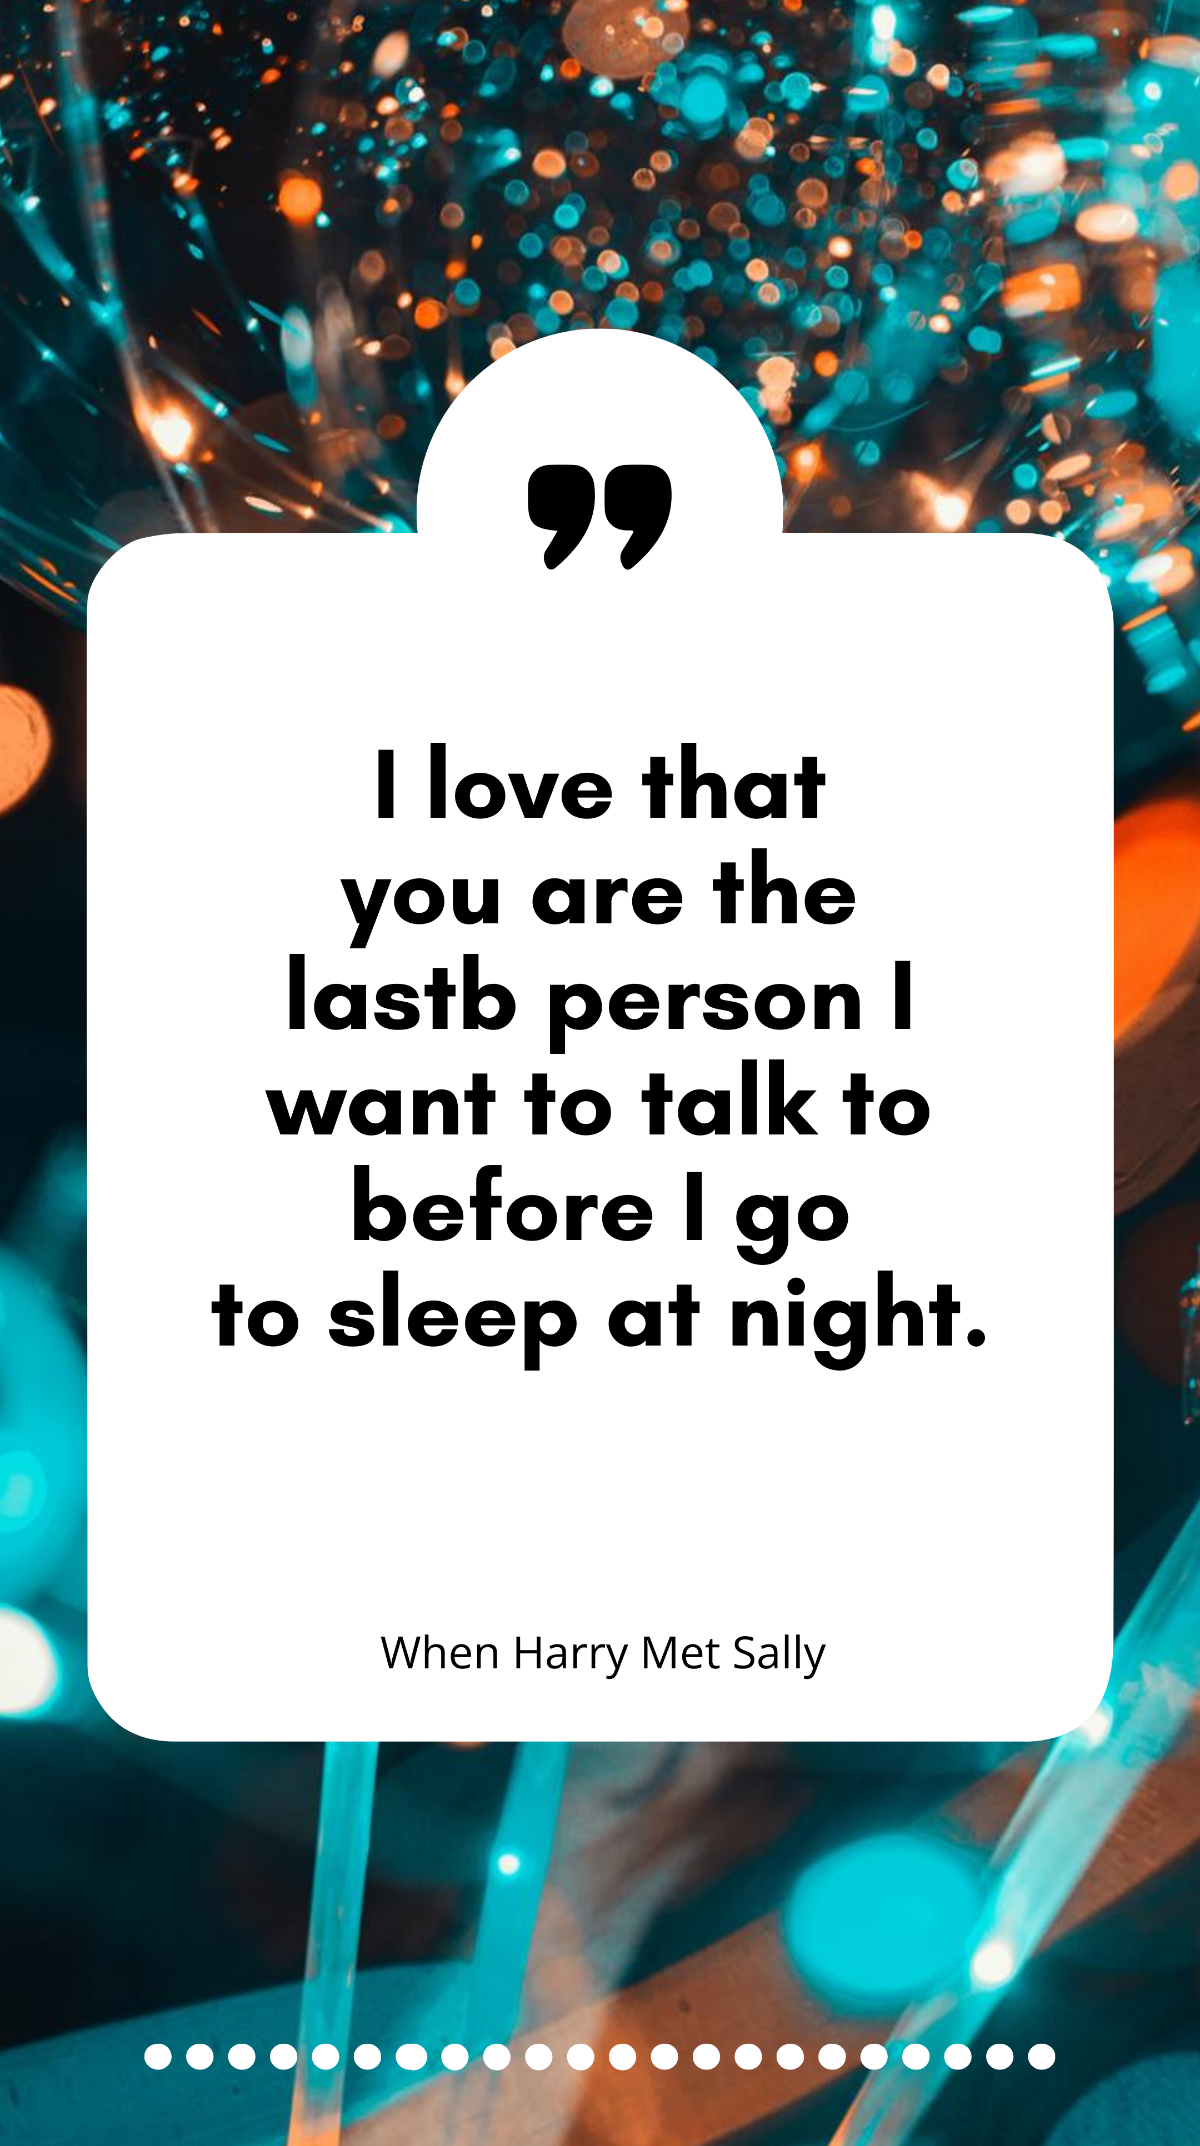 When Harry Met Sally - ”I love that you are the last person I want to talk to before I go to sleep at night.”  Template